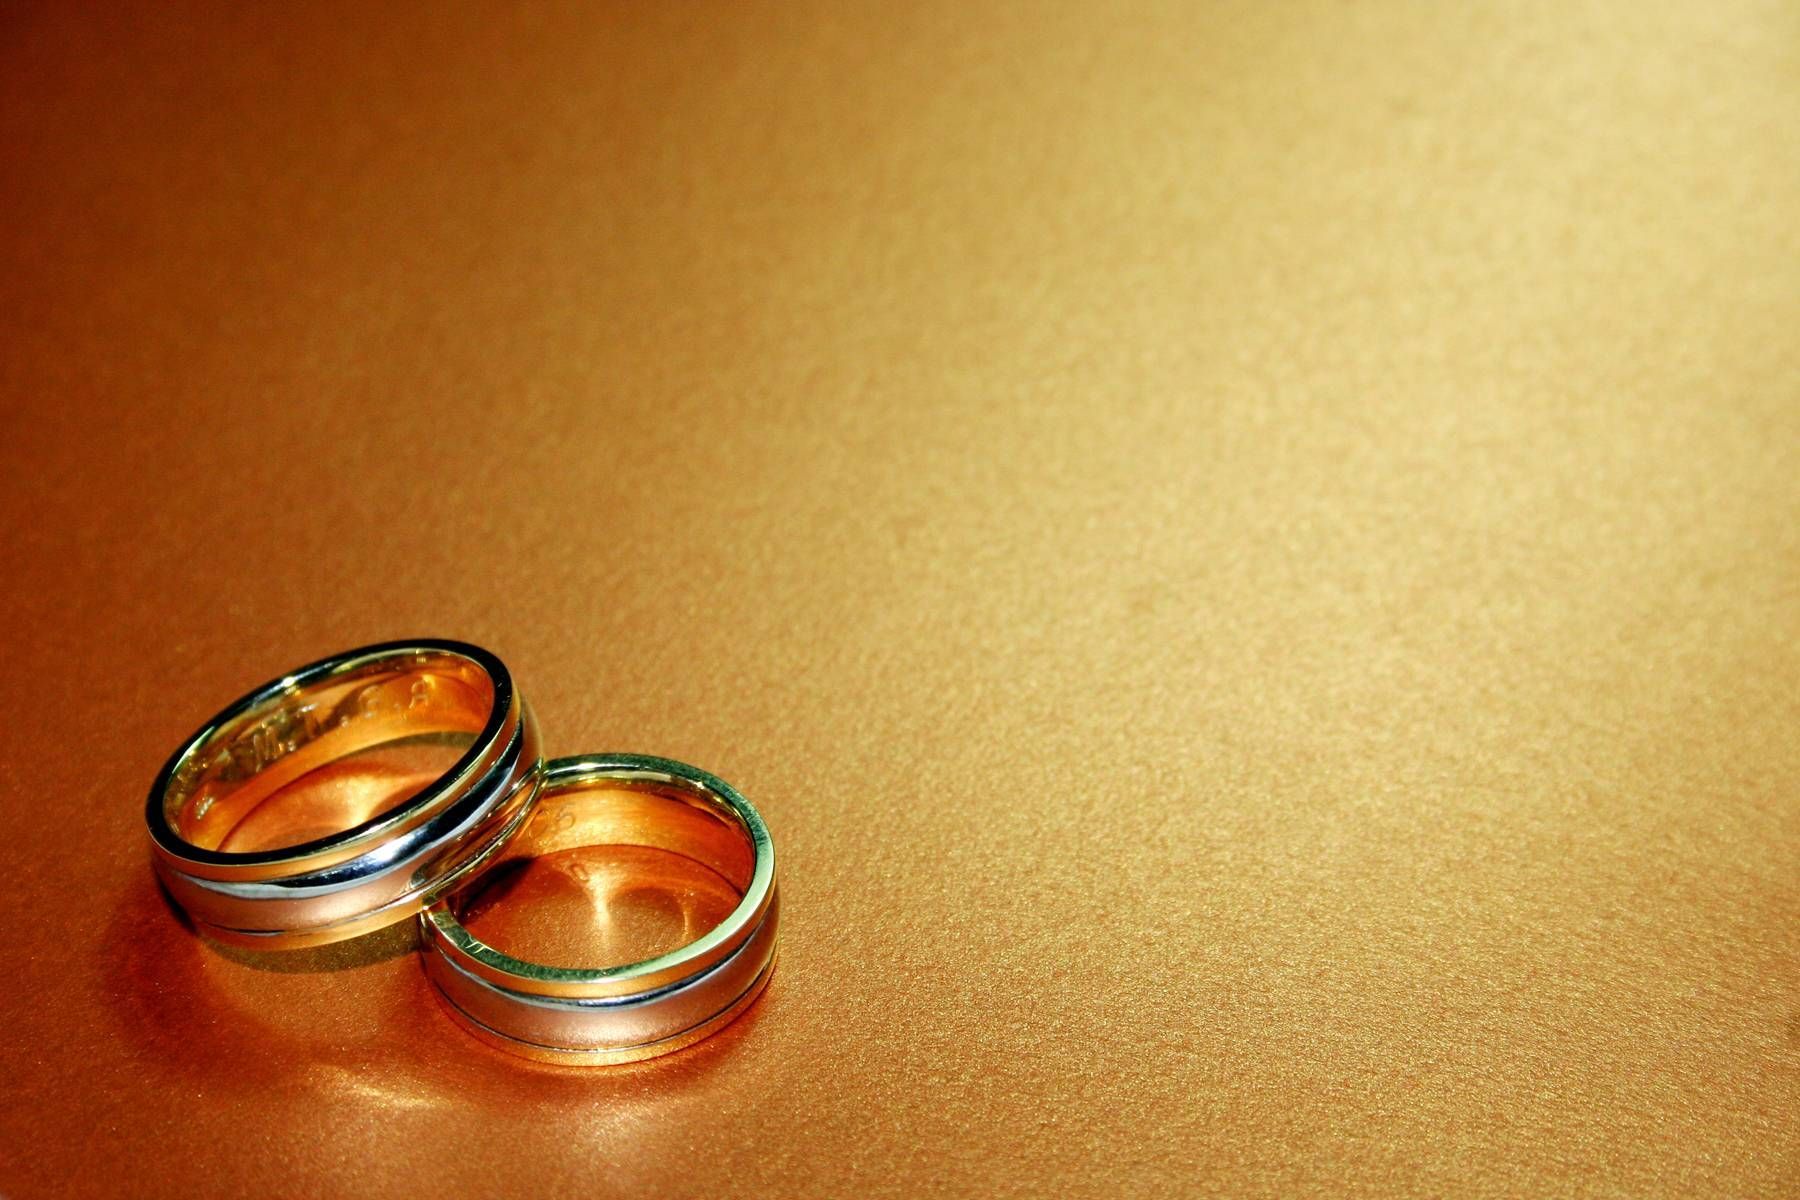 Gold Wallpaper Marriage Wedding Background